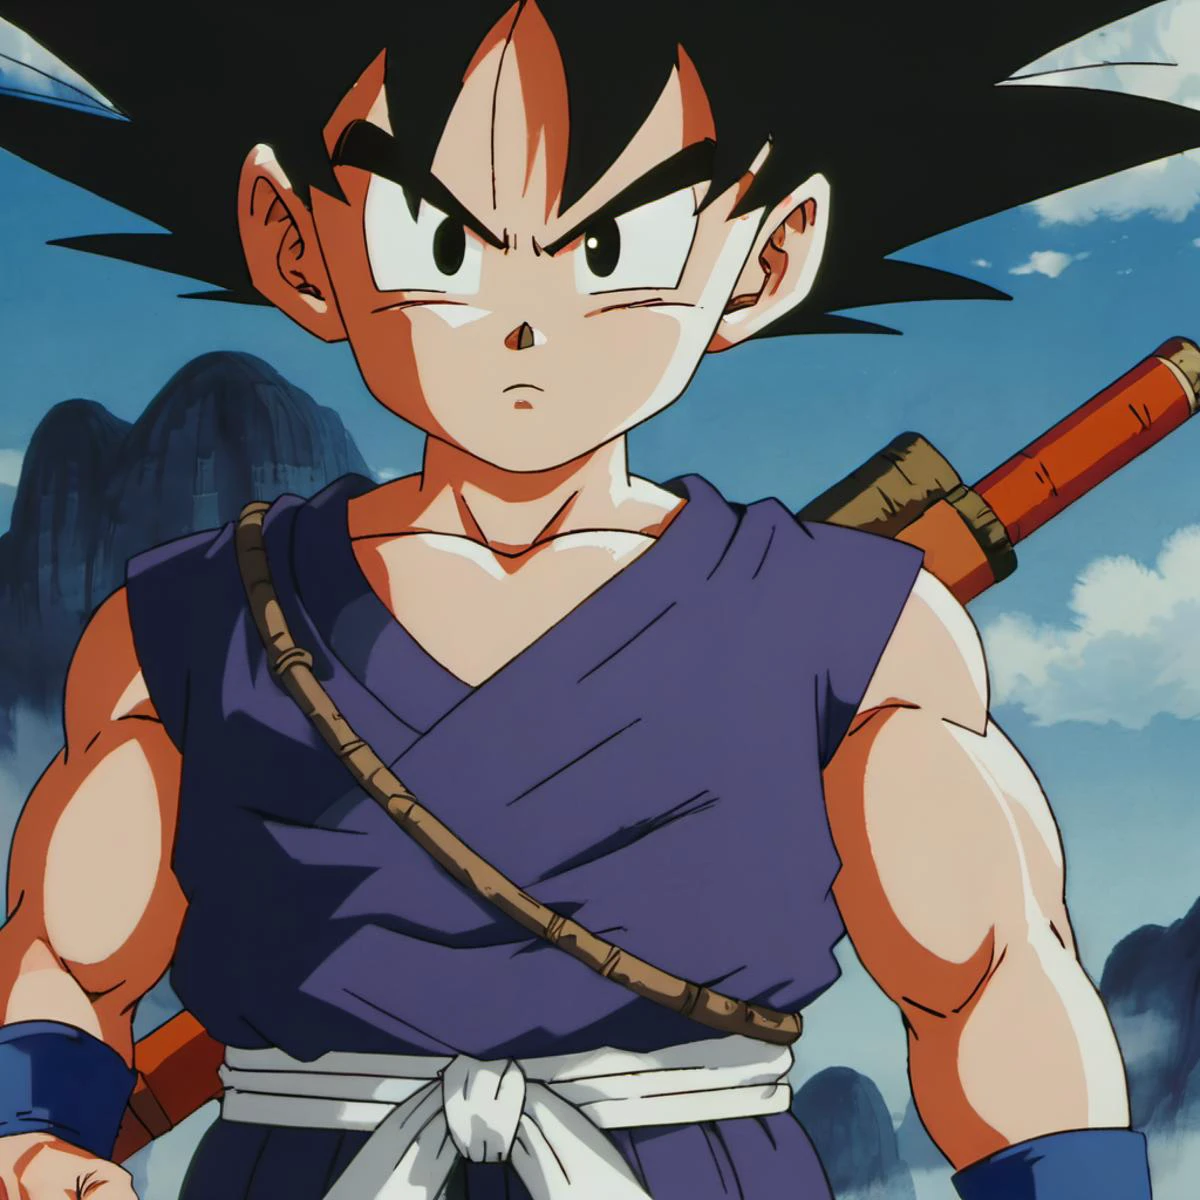 anime screencap in mnst artstyle of a son goku, hd, 4k, high-quality in the style of akira toriyama